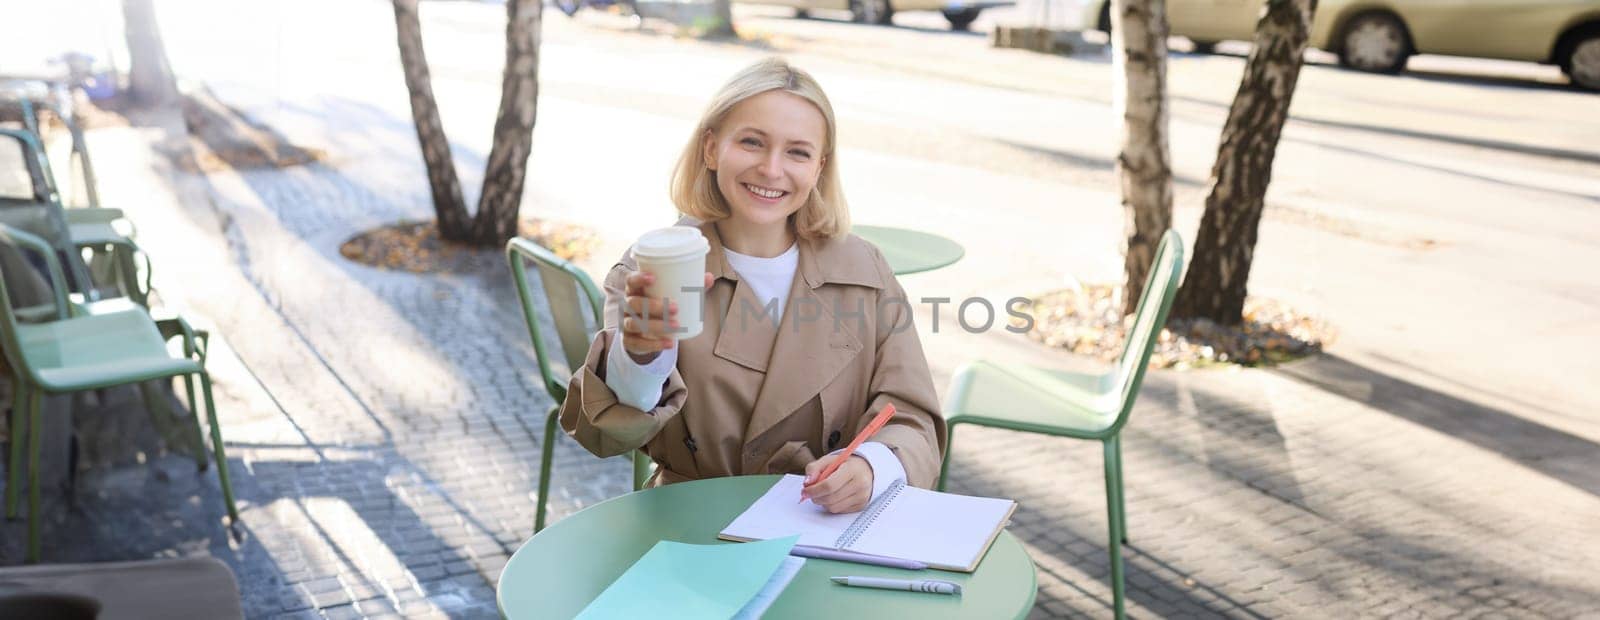 Smiling, cheerful woman drinking her coffee in street cafe, writing in notebook, doing homework, making notes. Student and lifestyle concept.